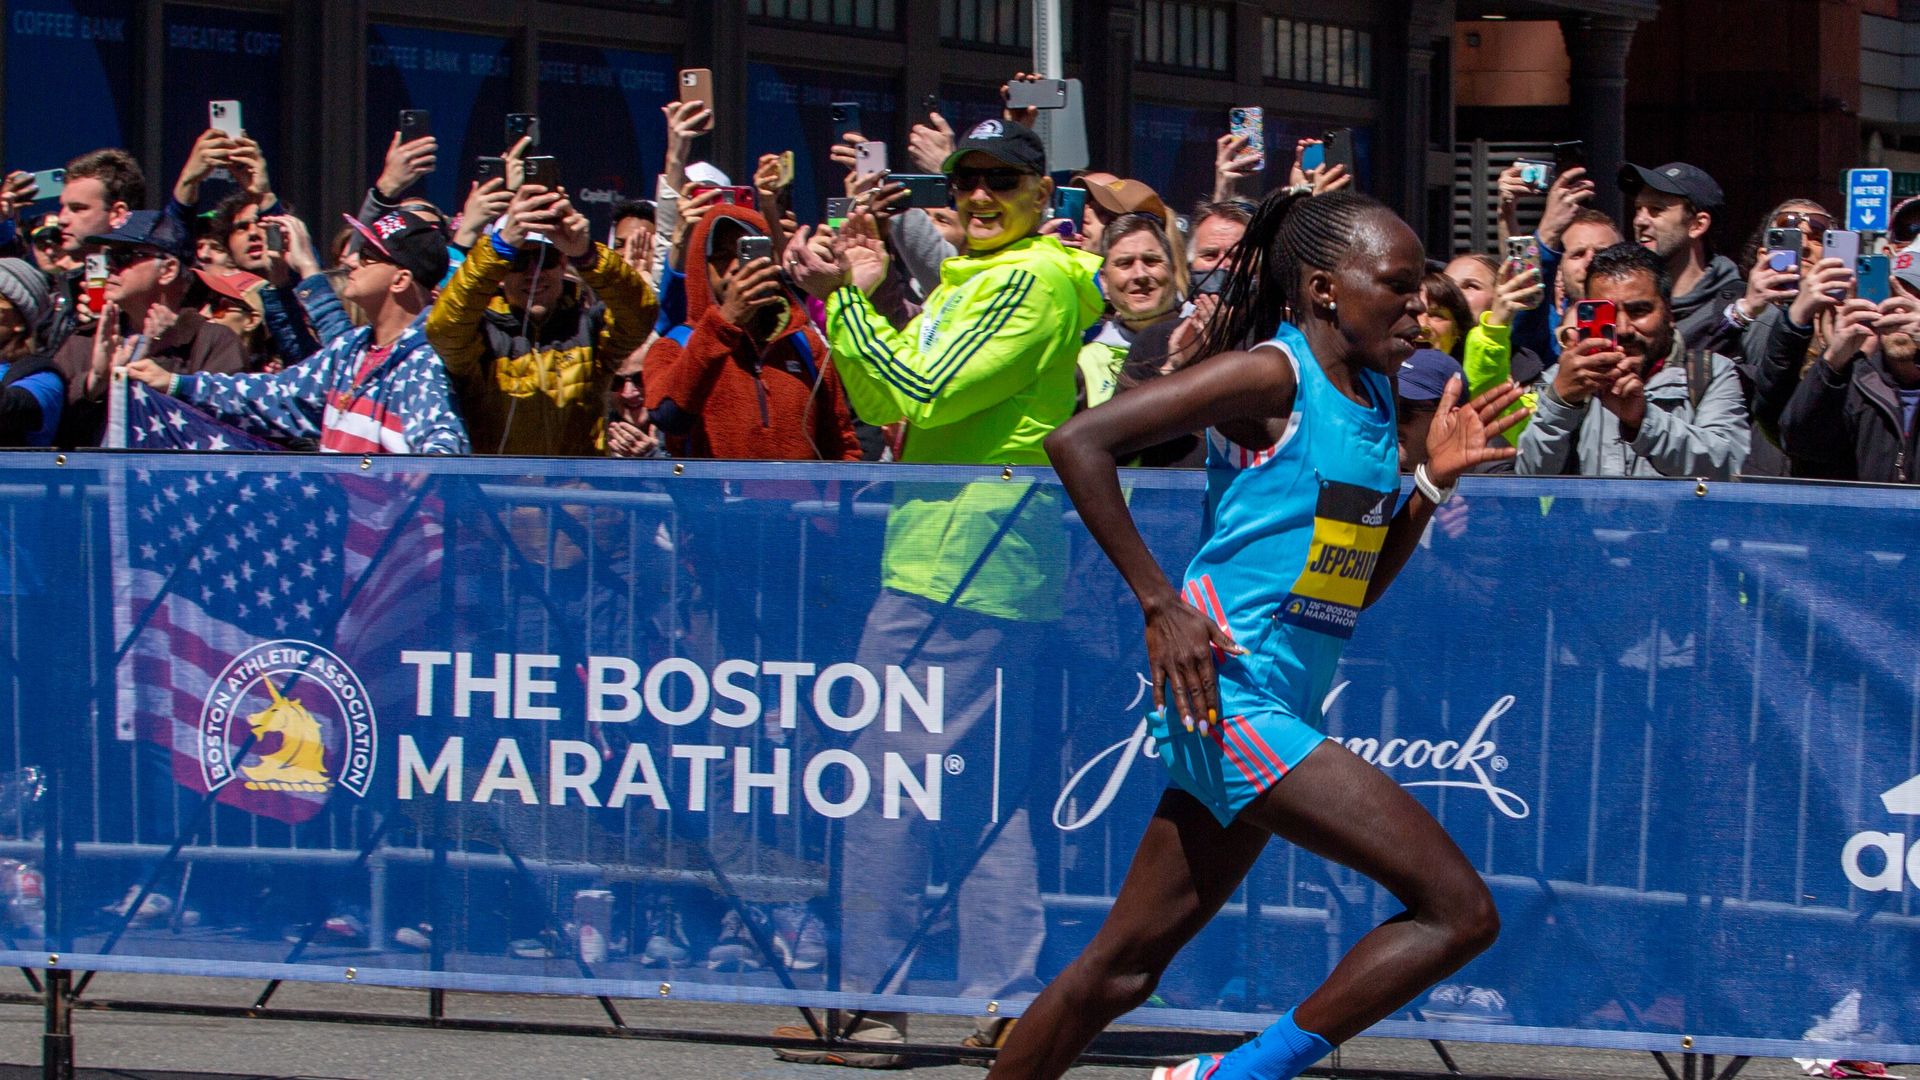 How to watch the Boston Marathon online, on TV and more What to Watch